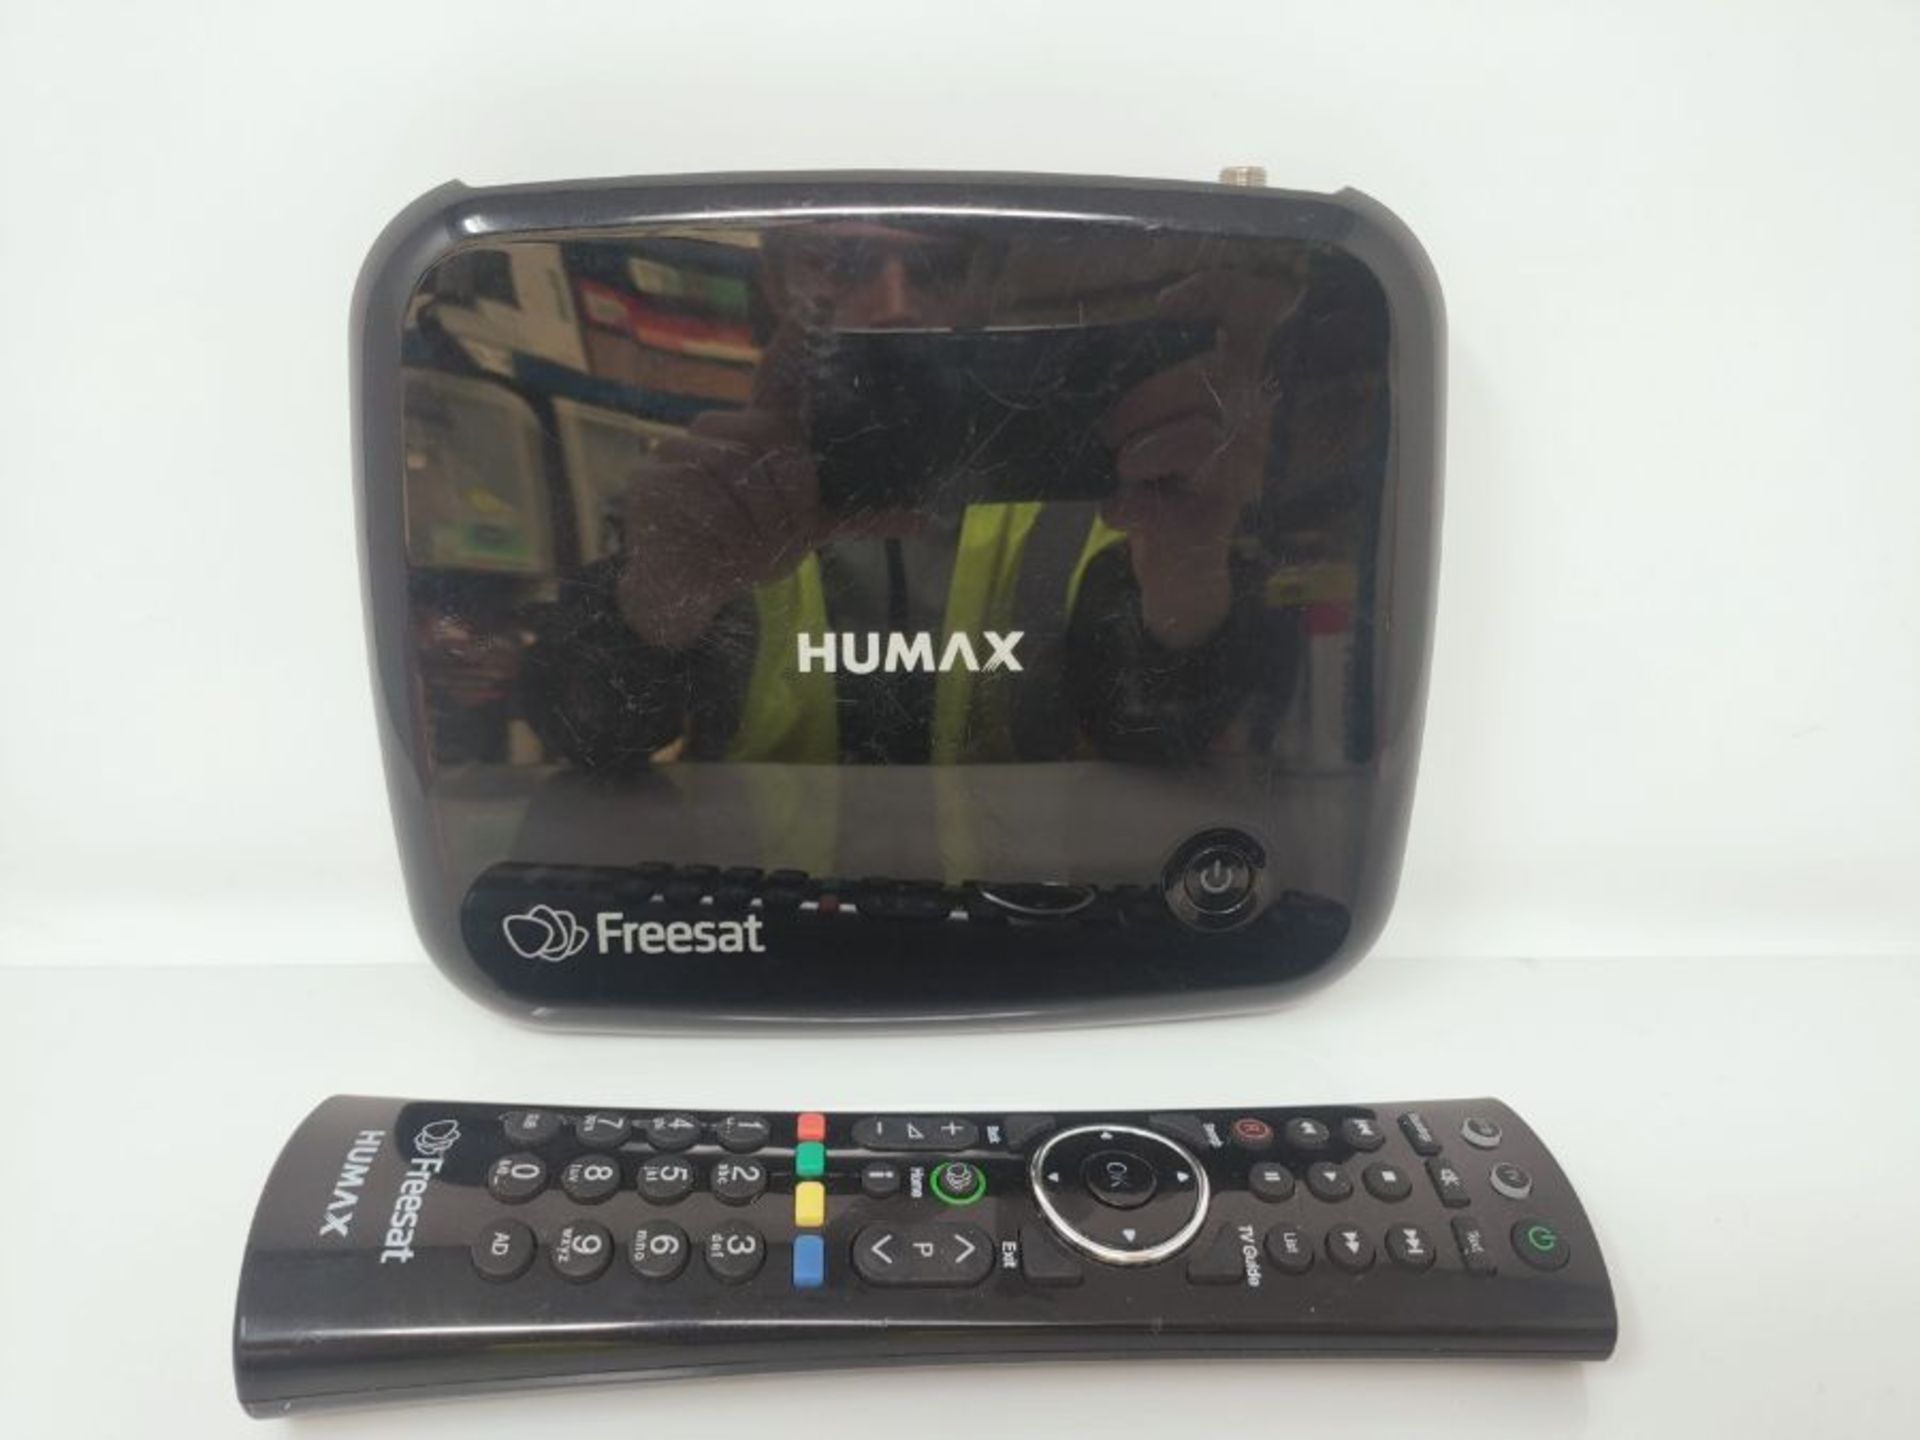 RRP £70.00 Humax HB-1100S Freesat HD TV with Satellite Receiver - Image 2 of 6